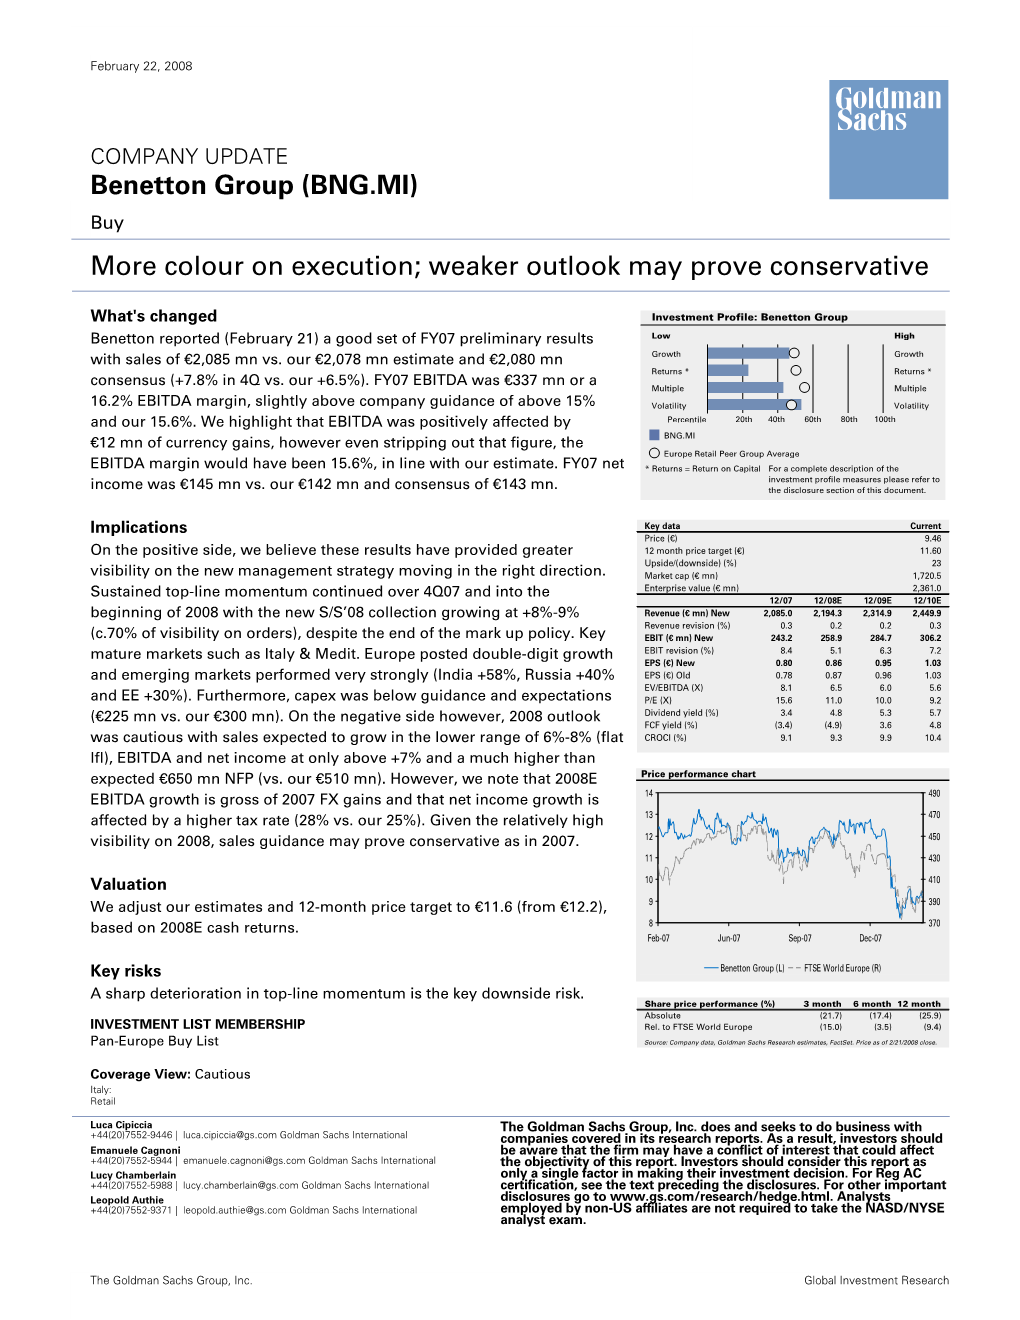 Benetton Group (BNG.MI) February 22, 2008